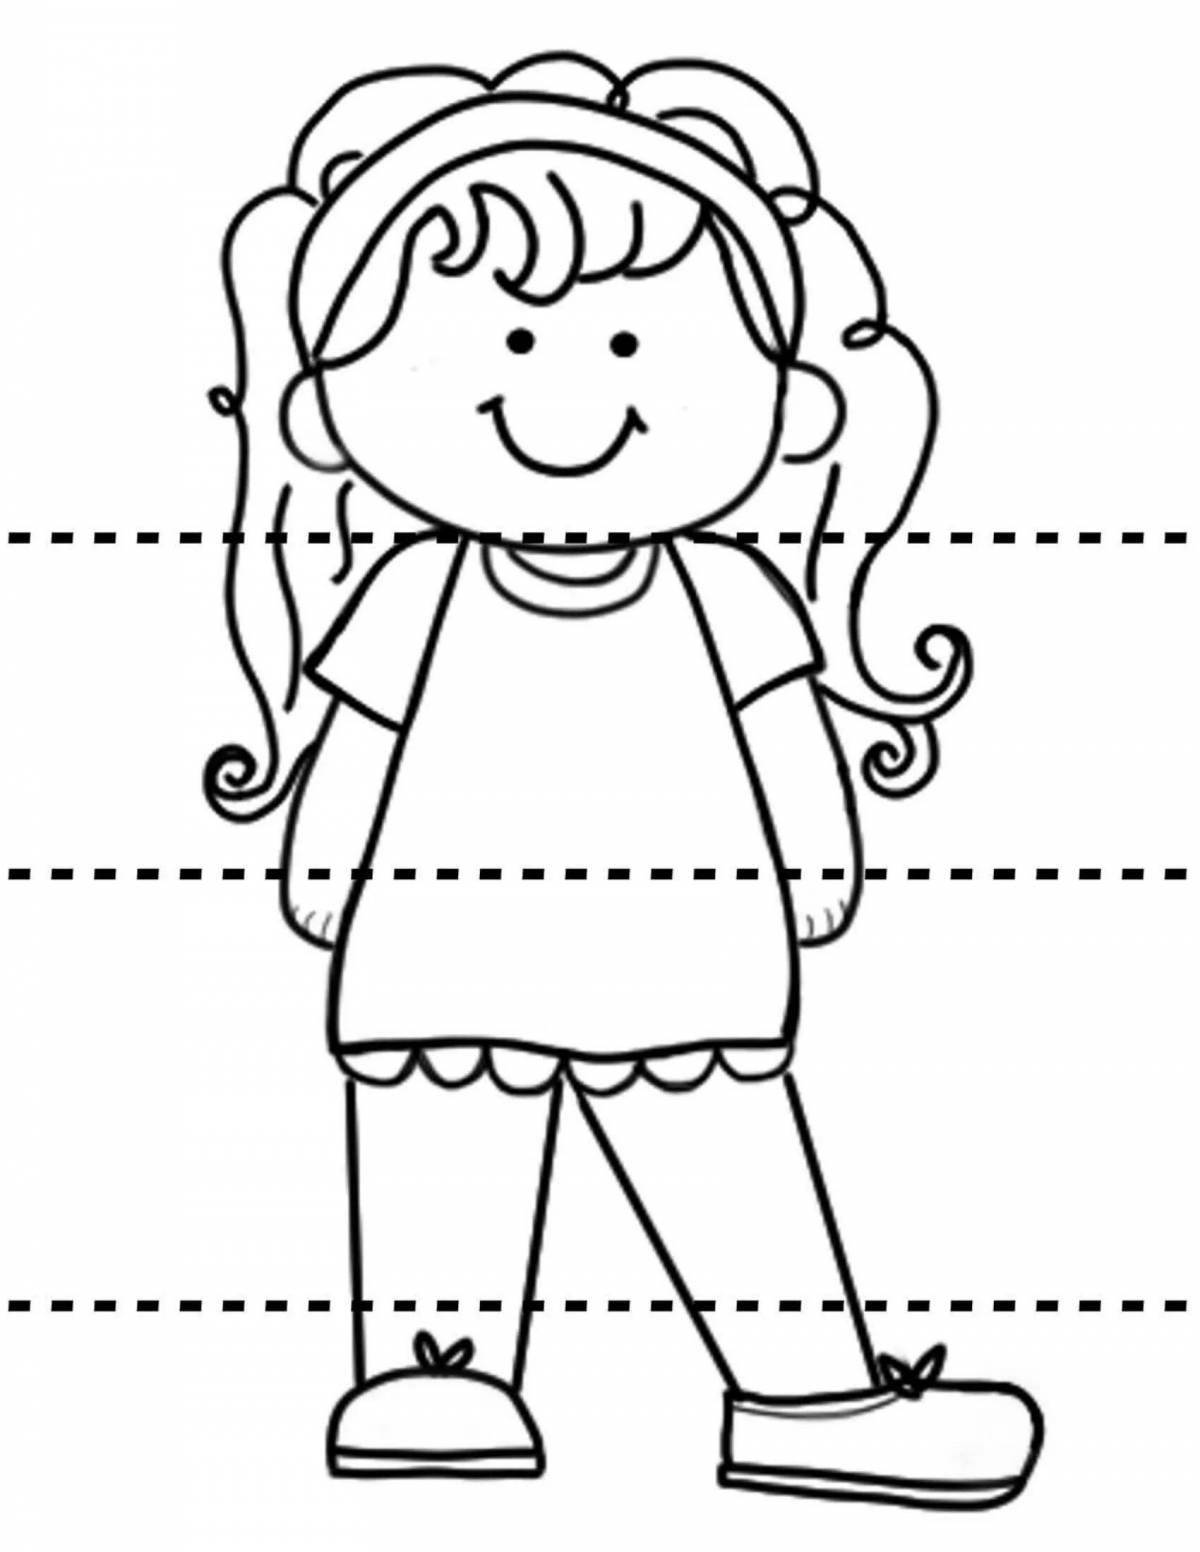 Bright human legs coloring page